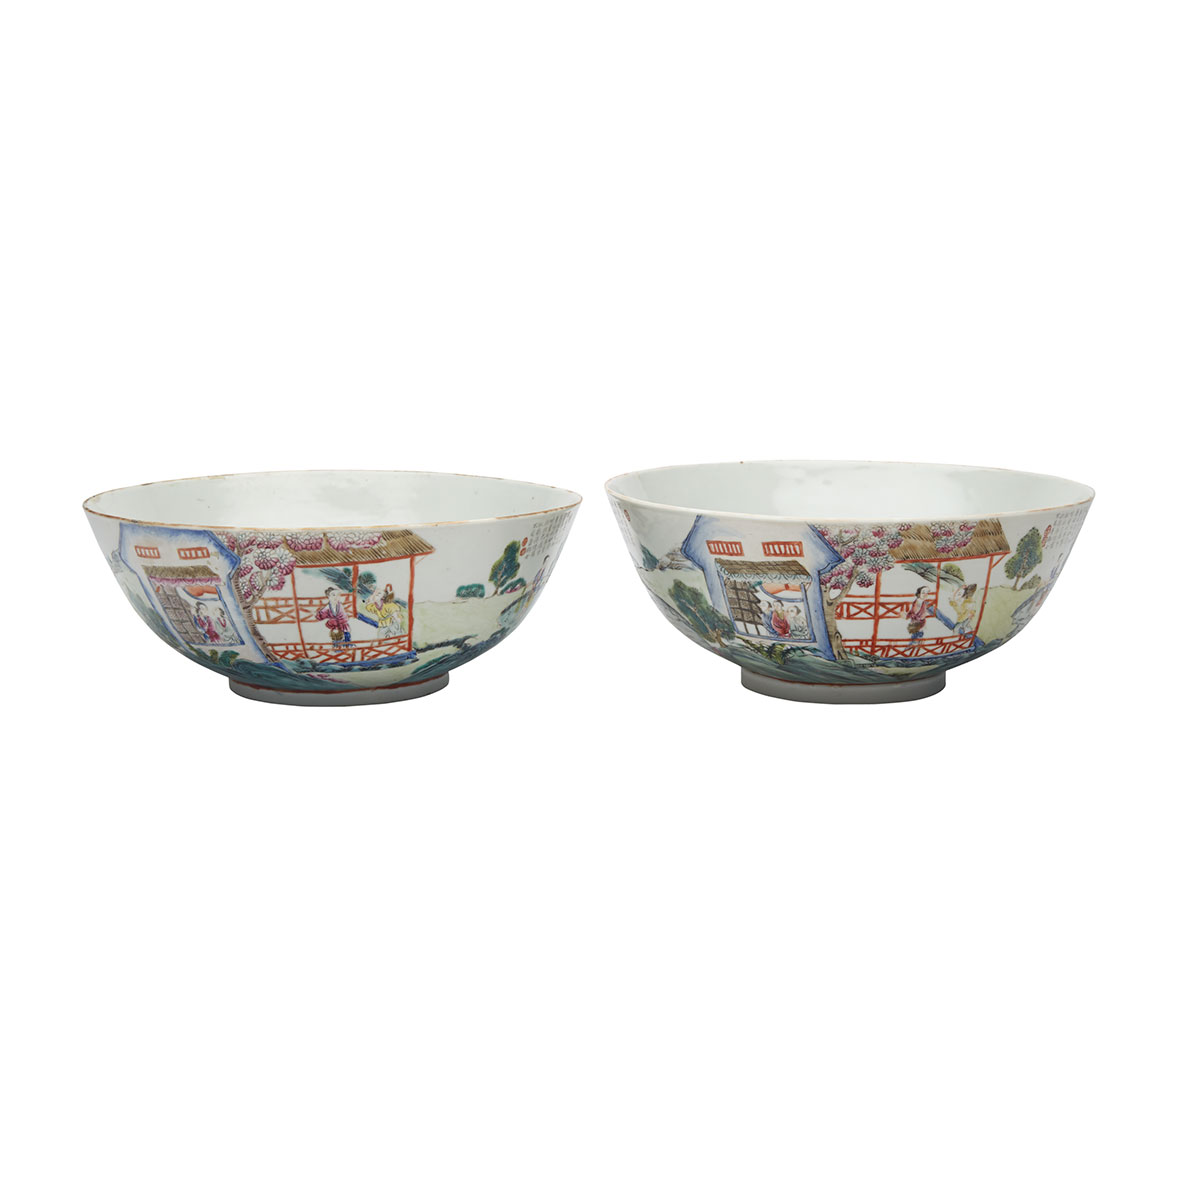 Pair of Large Famille Rose Landscape Bowls, Daoguang Mark and Period (1821-1850)